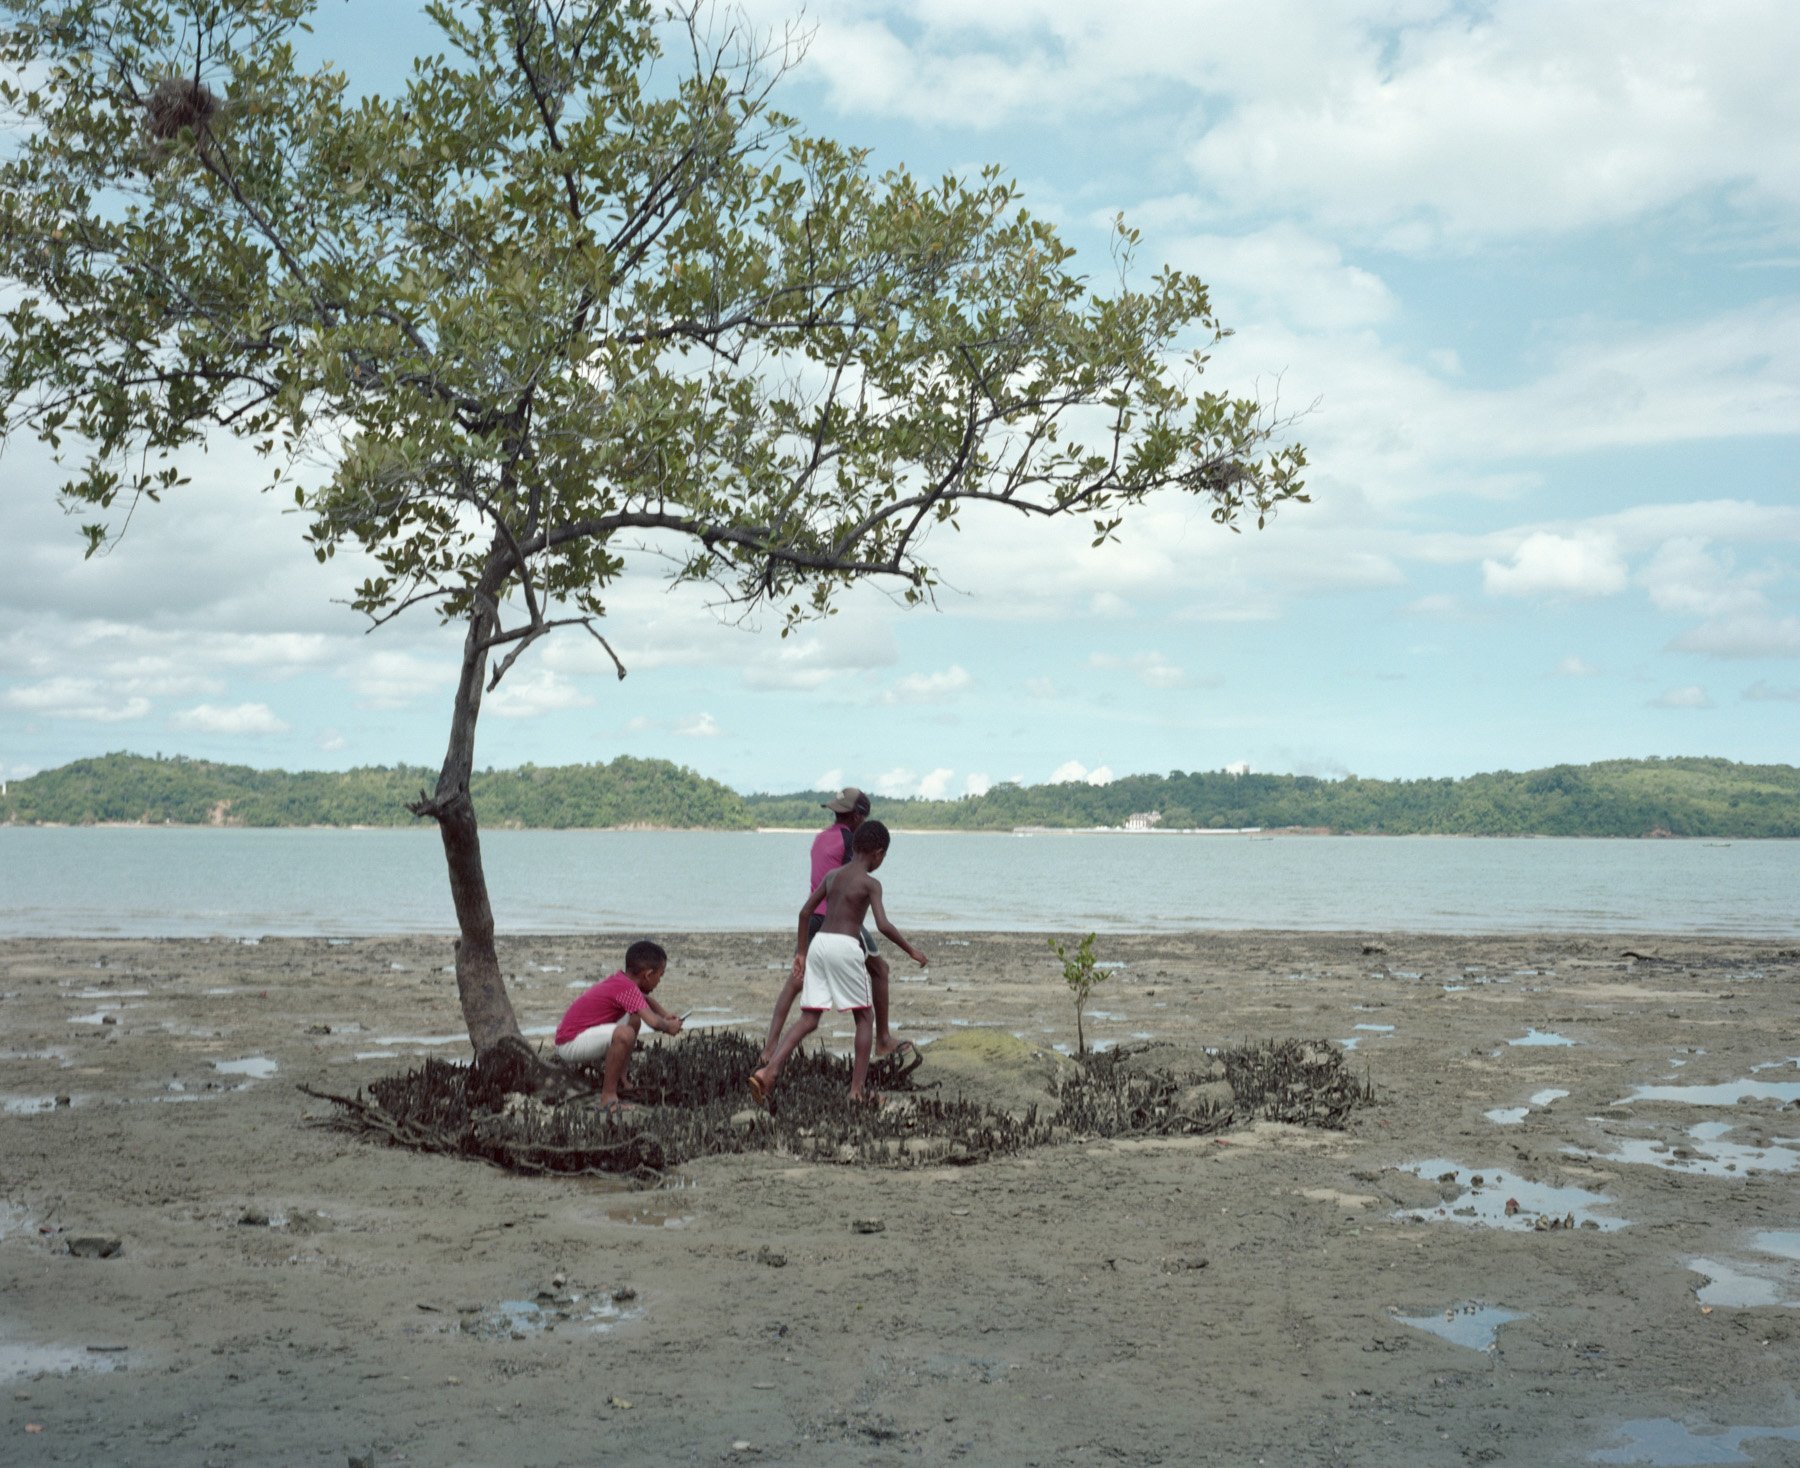  Ilha da Maré, Bahia, Brazil, 2020. Children from Ilha da Maré play while searching for seafood. The Ilha da Mare is the home of several Quilombola’s communities that live of fishing. The waters where they fish are polluted with petrochemical residue